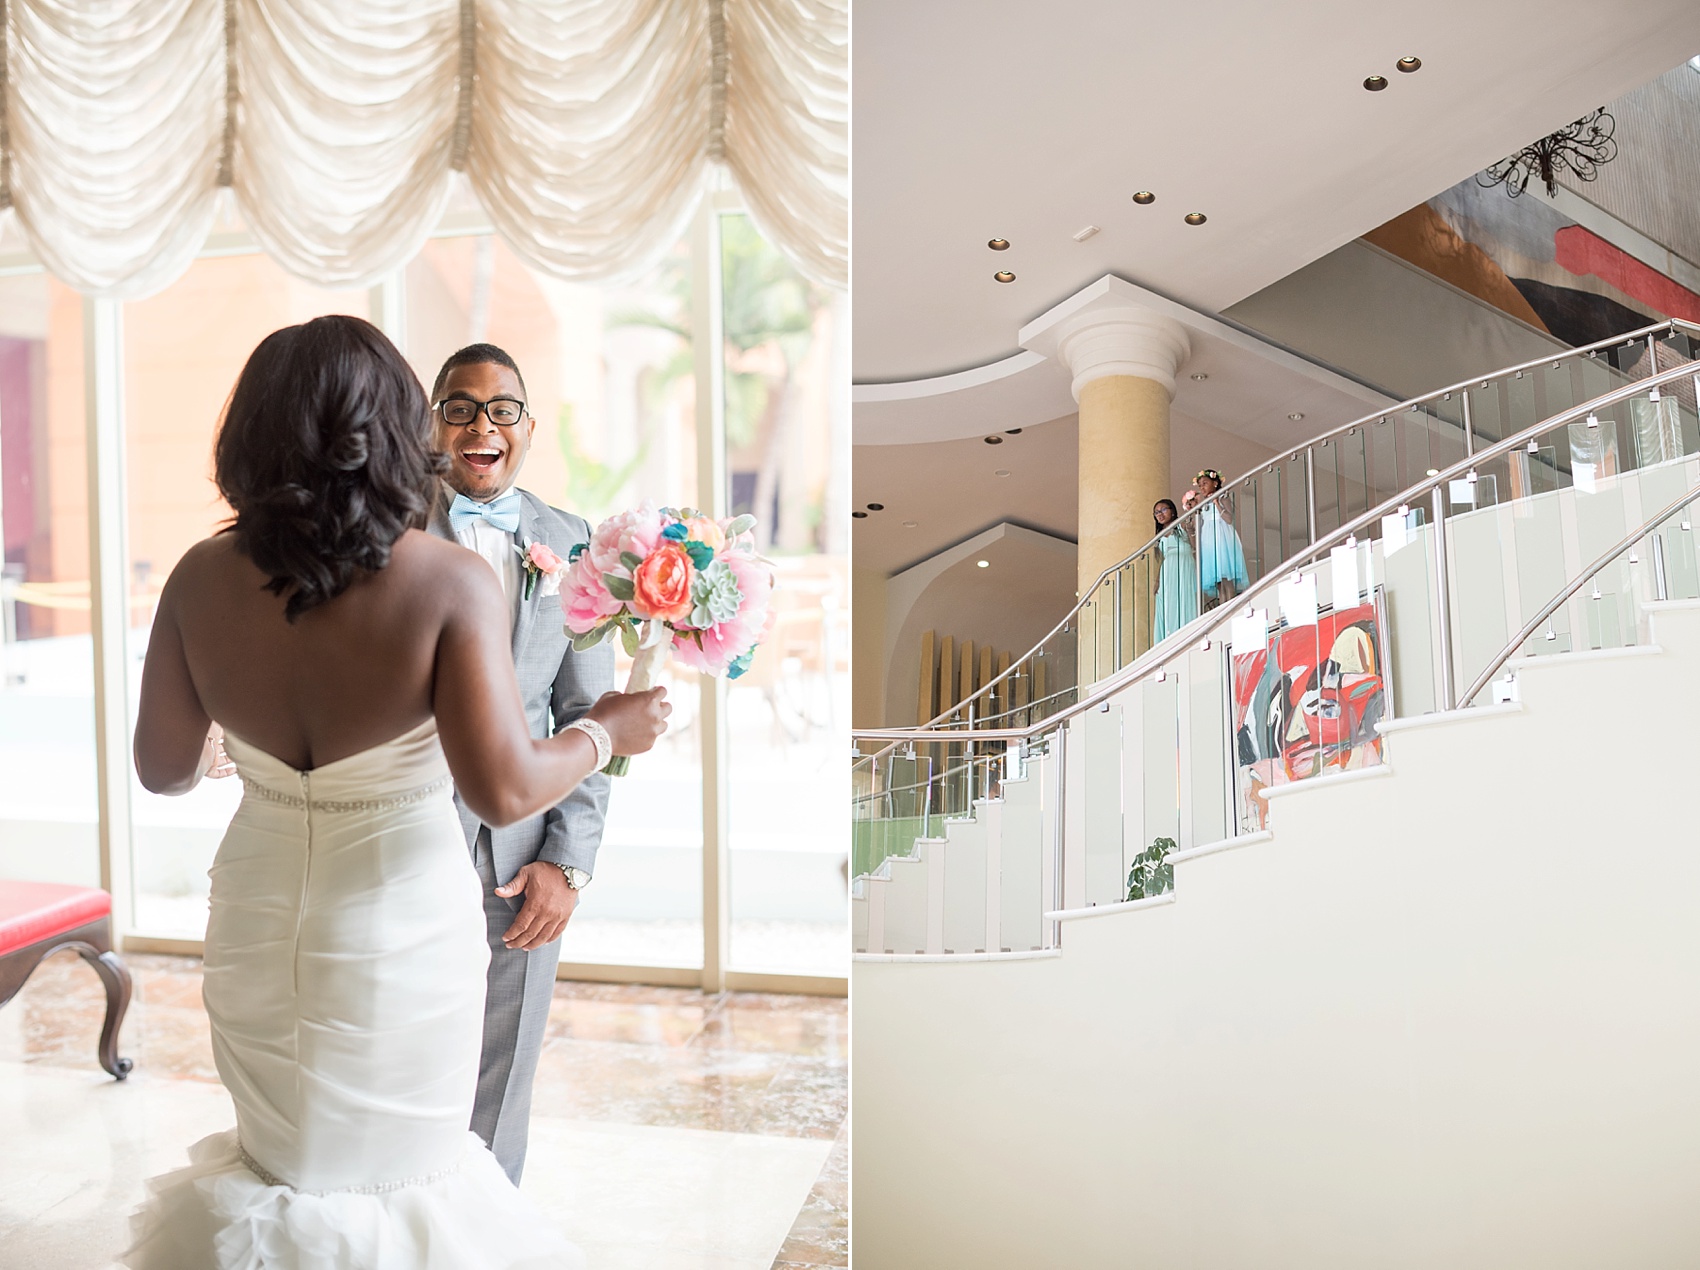 Iberostar Jamaica wedding photos, first look. Images by Mikkel Paige Photography.